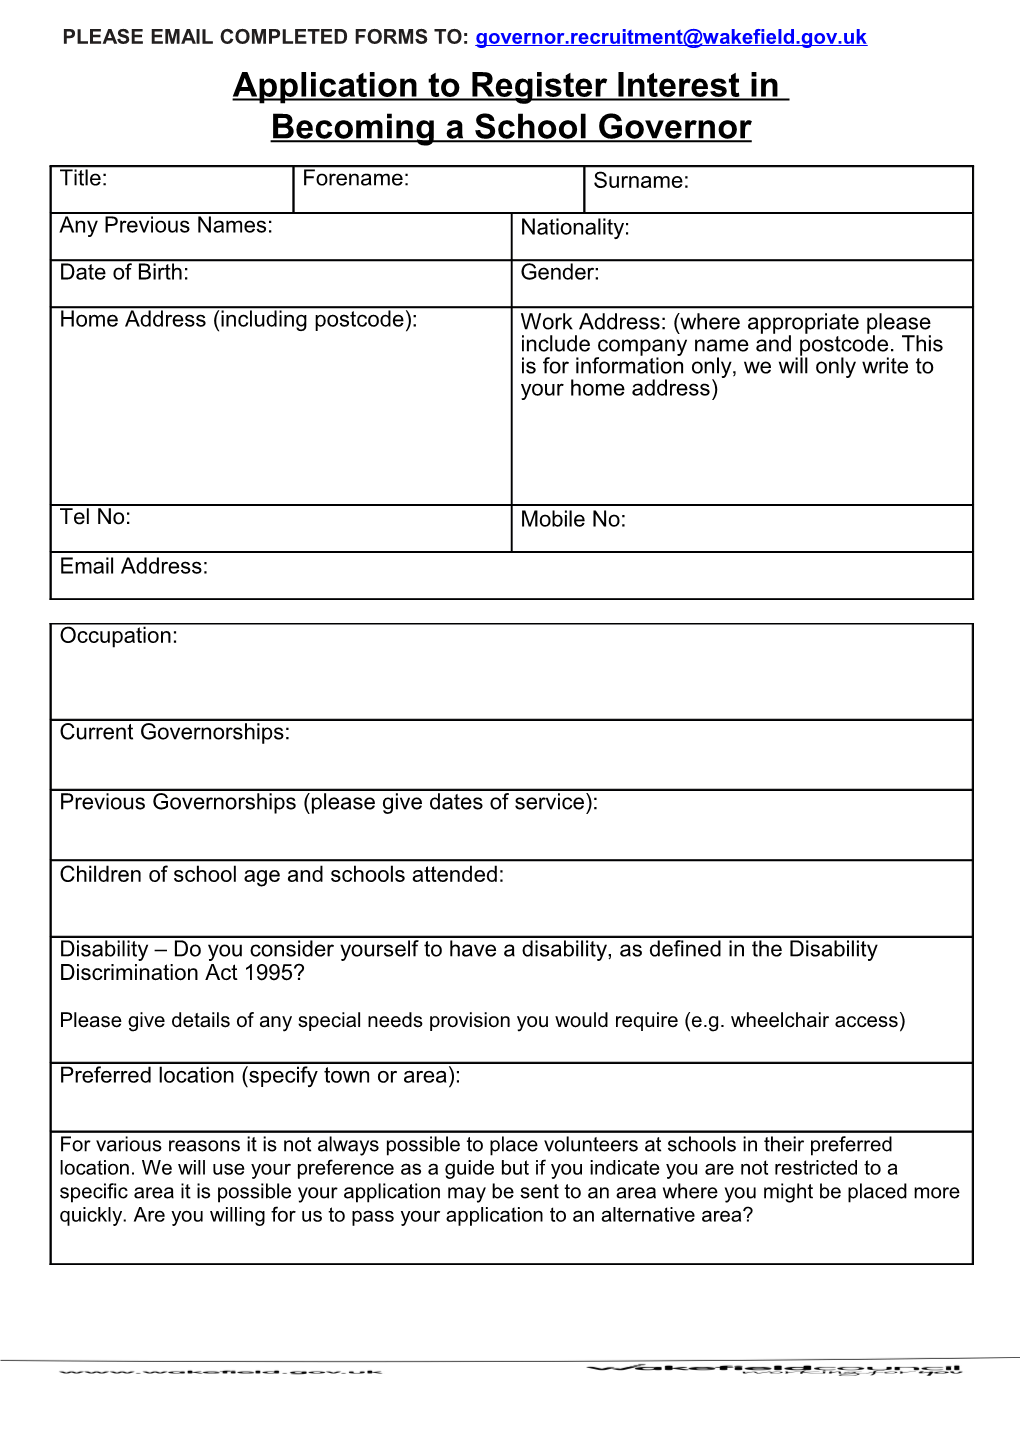 Wakefield Governors - Application Form